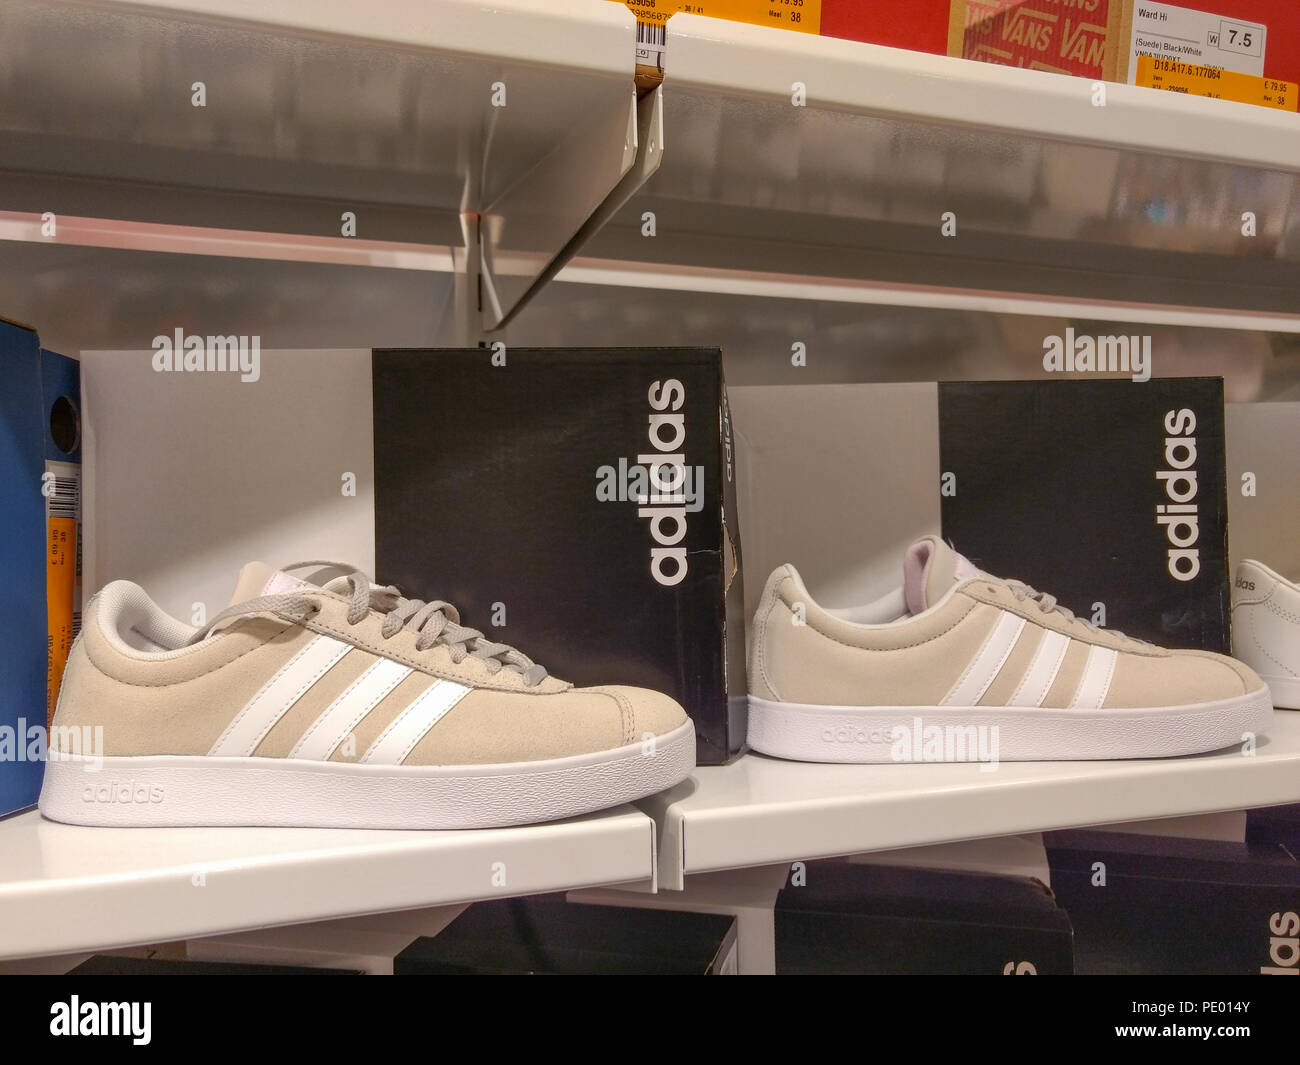 White Adidas sneakers displayed on shelves in shoe store Stock Photo - Alamy